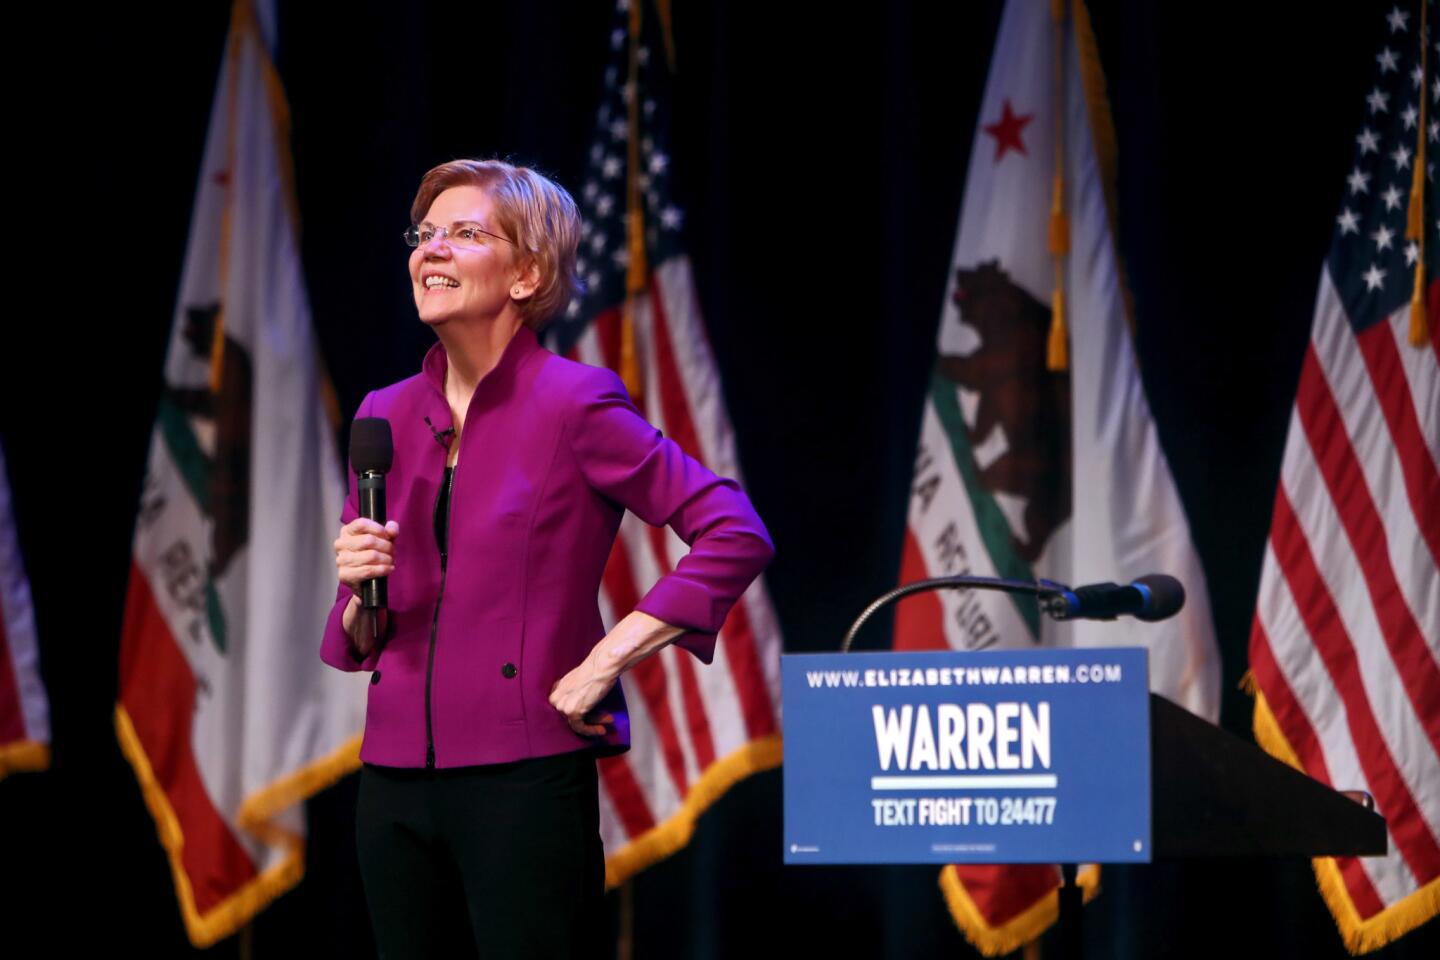 United States senator and democratic presidential candidate Elizabeth Warren spoke at the Alex Theater in Glendale on Monday, Feb. 18, 2019. According to estimates, 1,400 people sat inside while 300 stood in the overflow area.